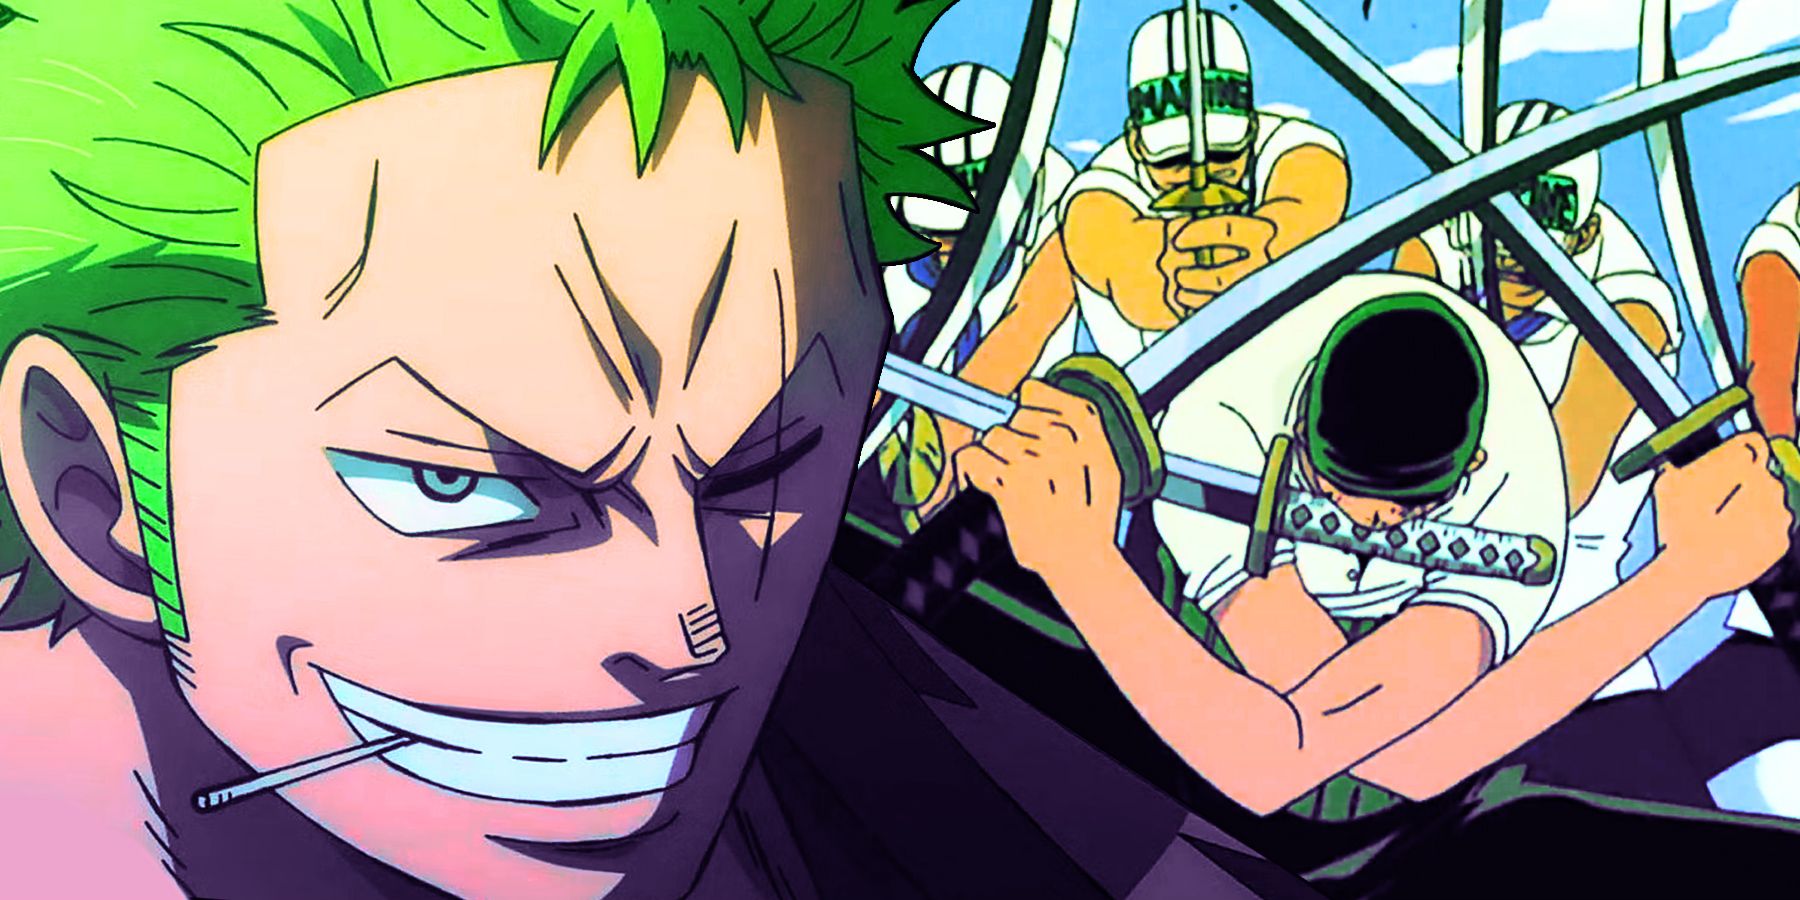 How can Mihawk wield such a big sword effectively in One Piece? - Quora